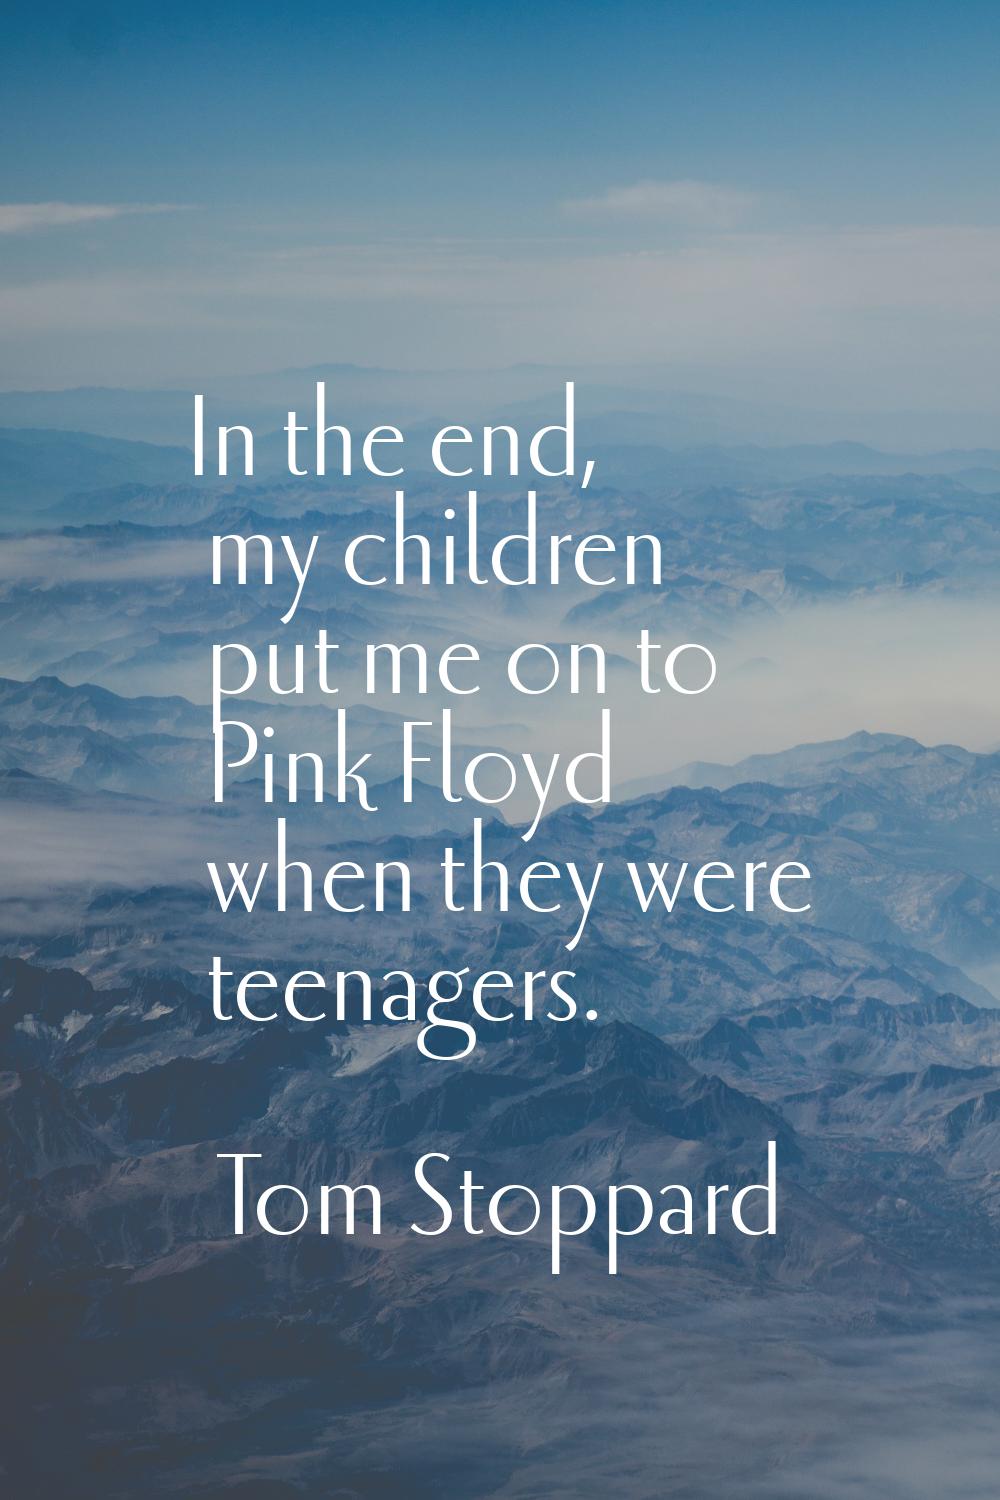 In the end, my children put me on to Pink Floyd when they were teenagers.